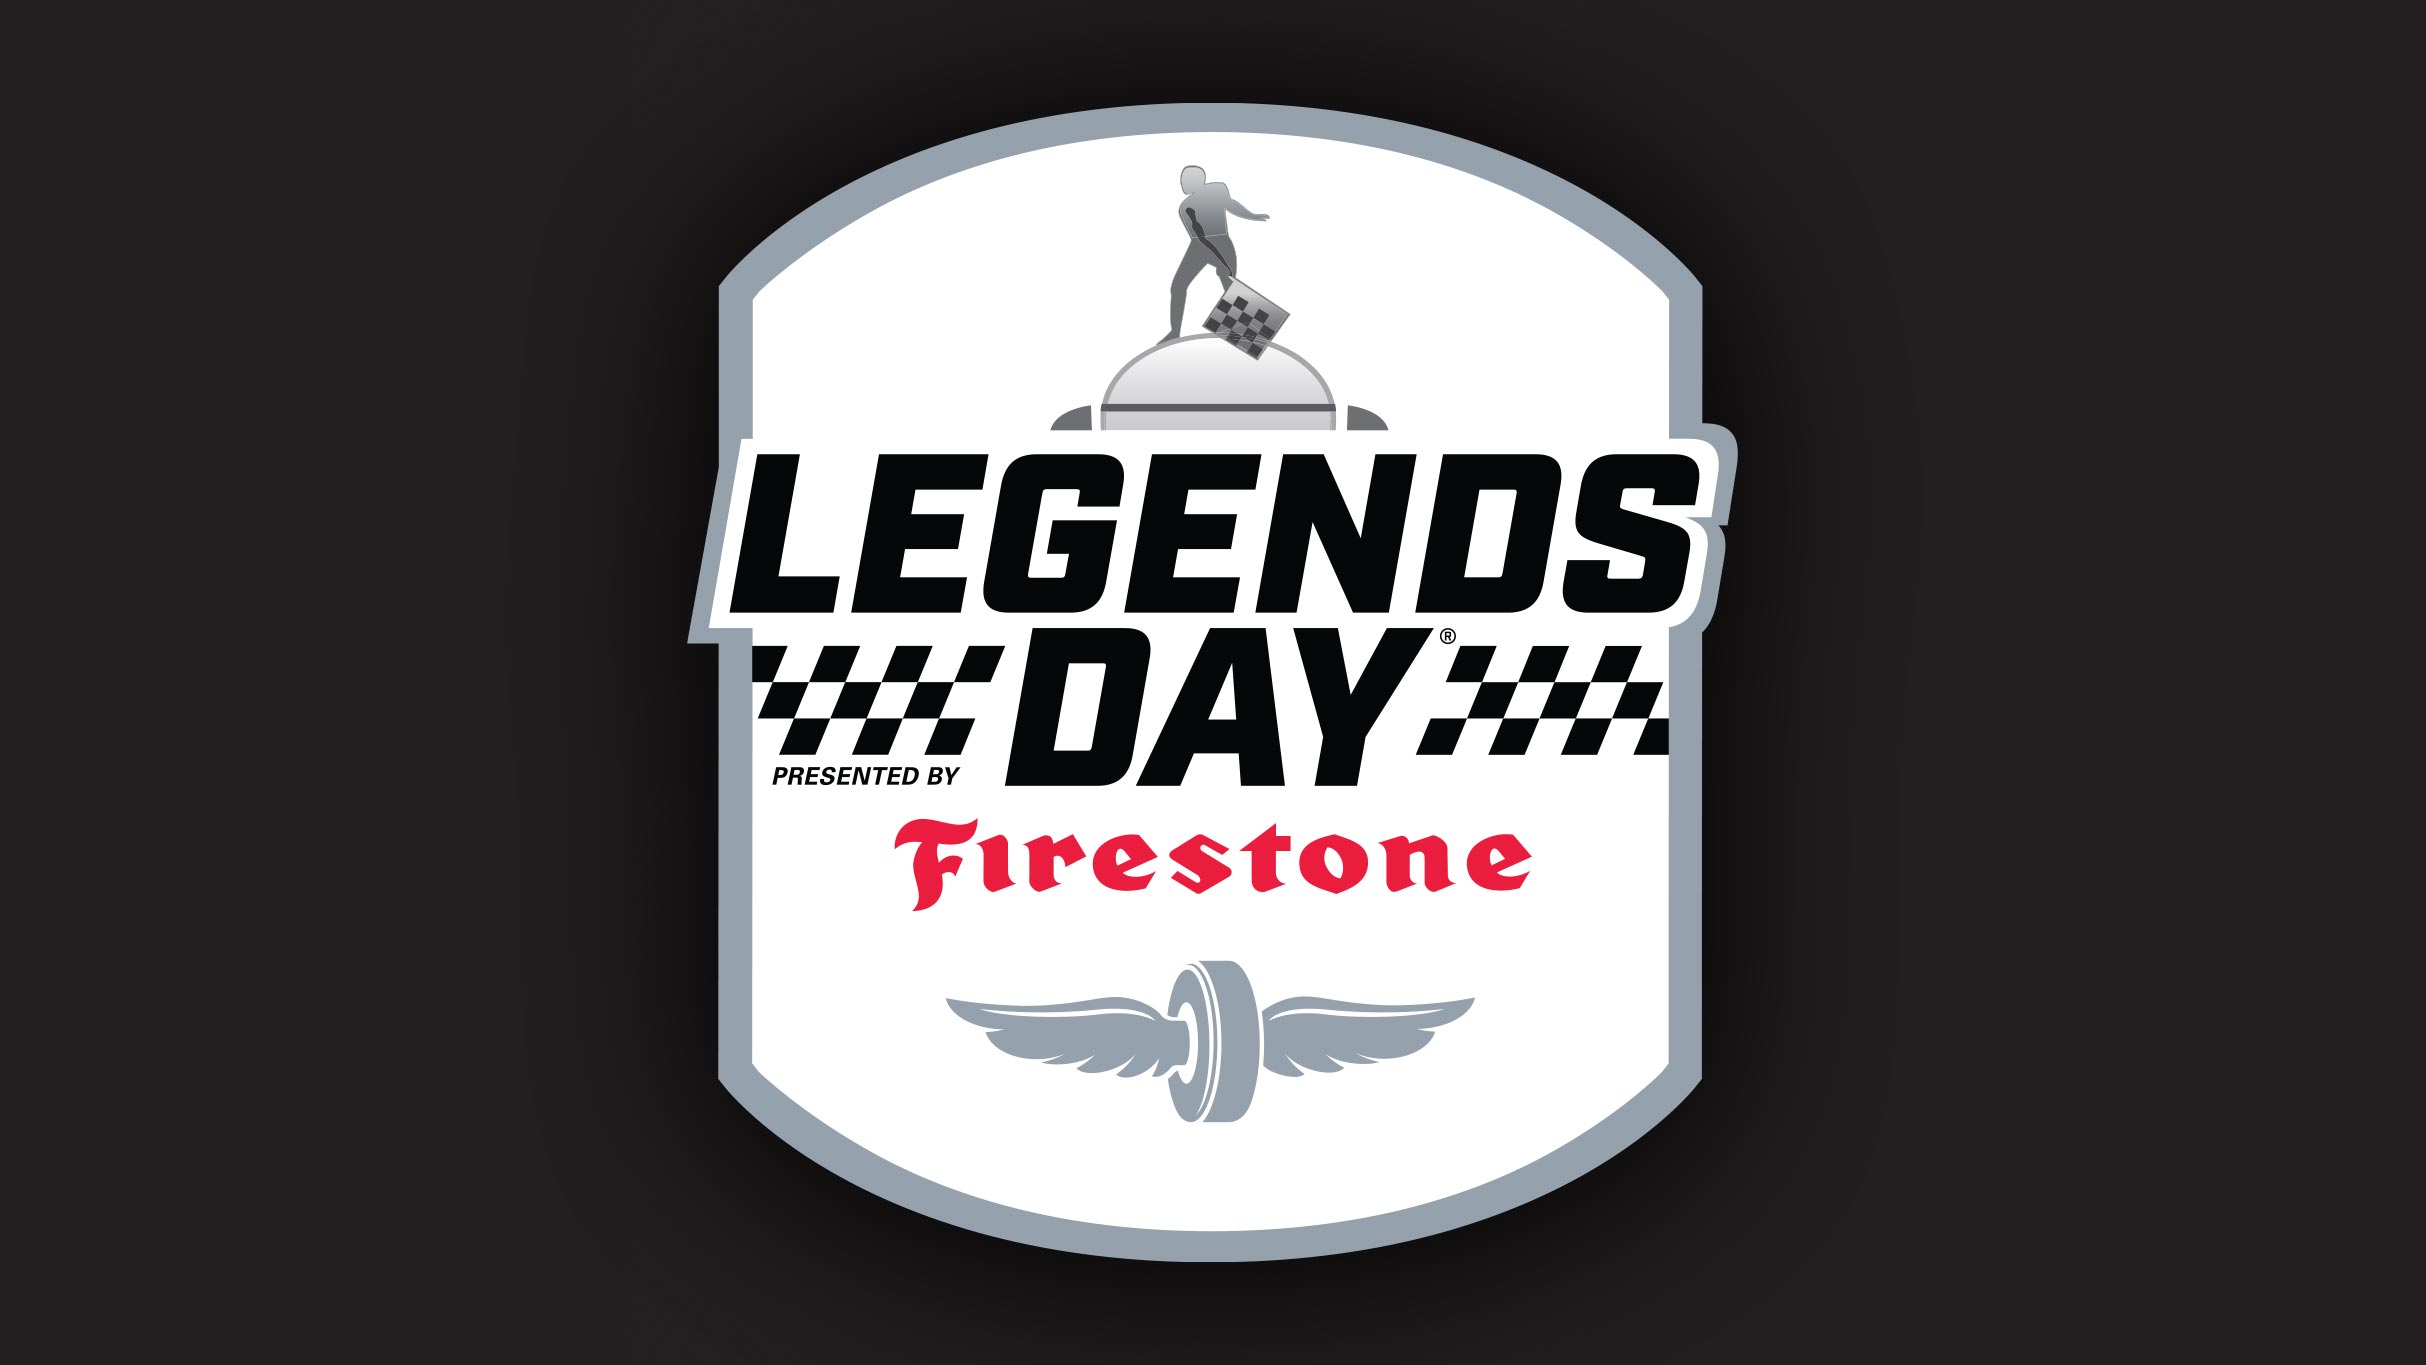 Firestone Legends Day Concert Featuring Riley Green in Indianapolis promo photo for Official Platinum Public Onsale presale offer code